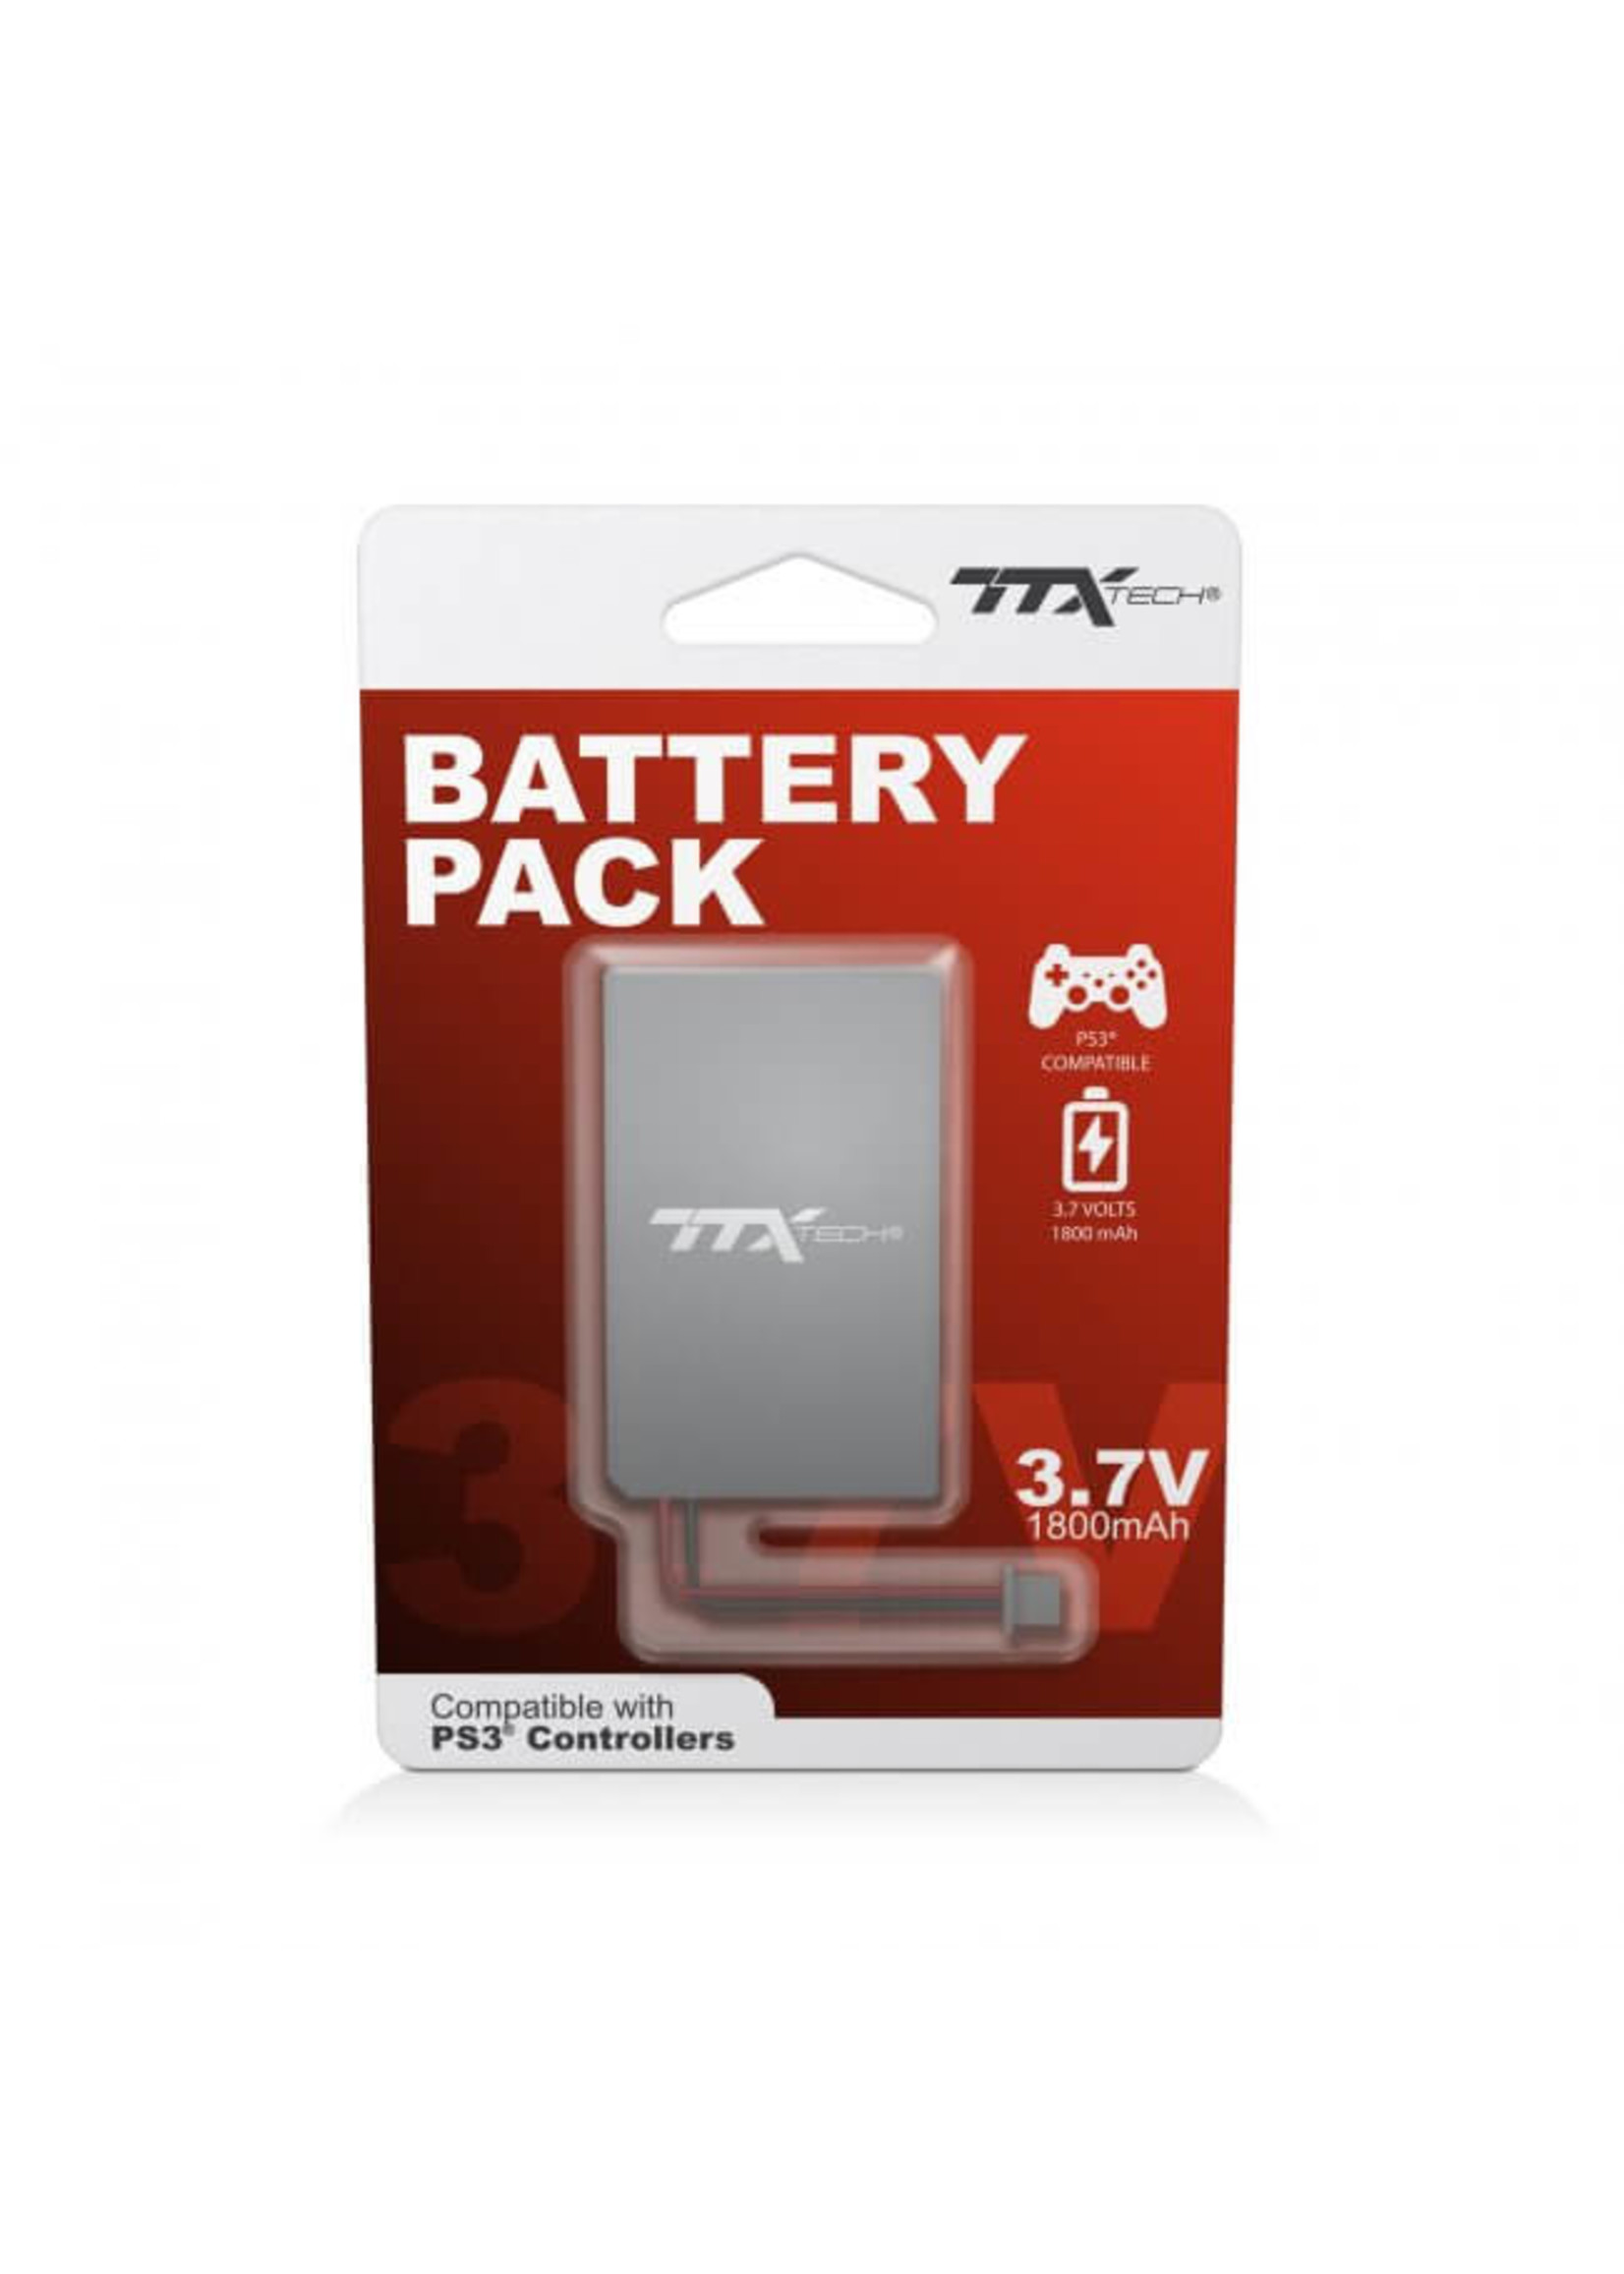 Sony Playstation 3 (PS3) PS3 TTX Tech Controller Battery Pack